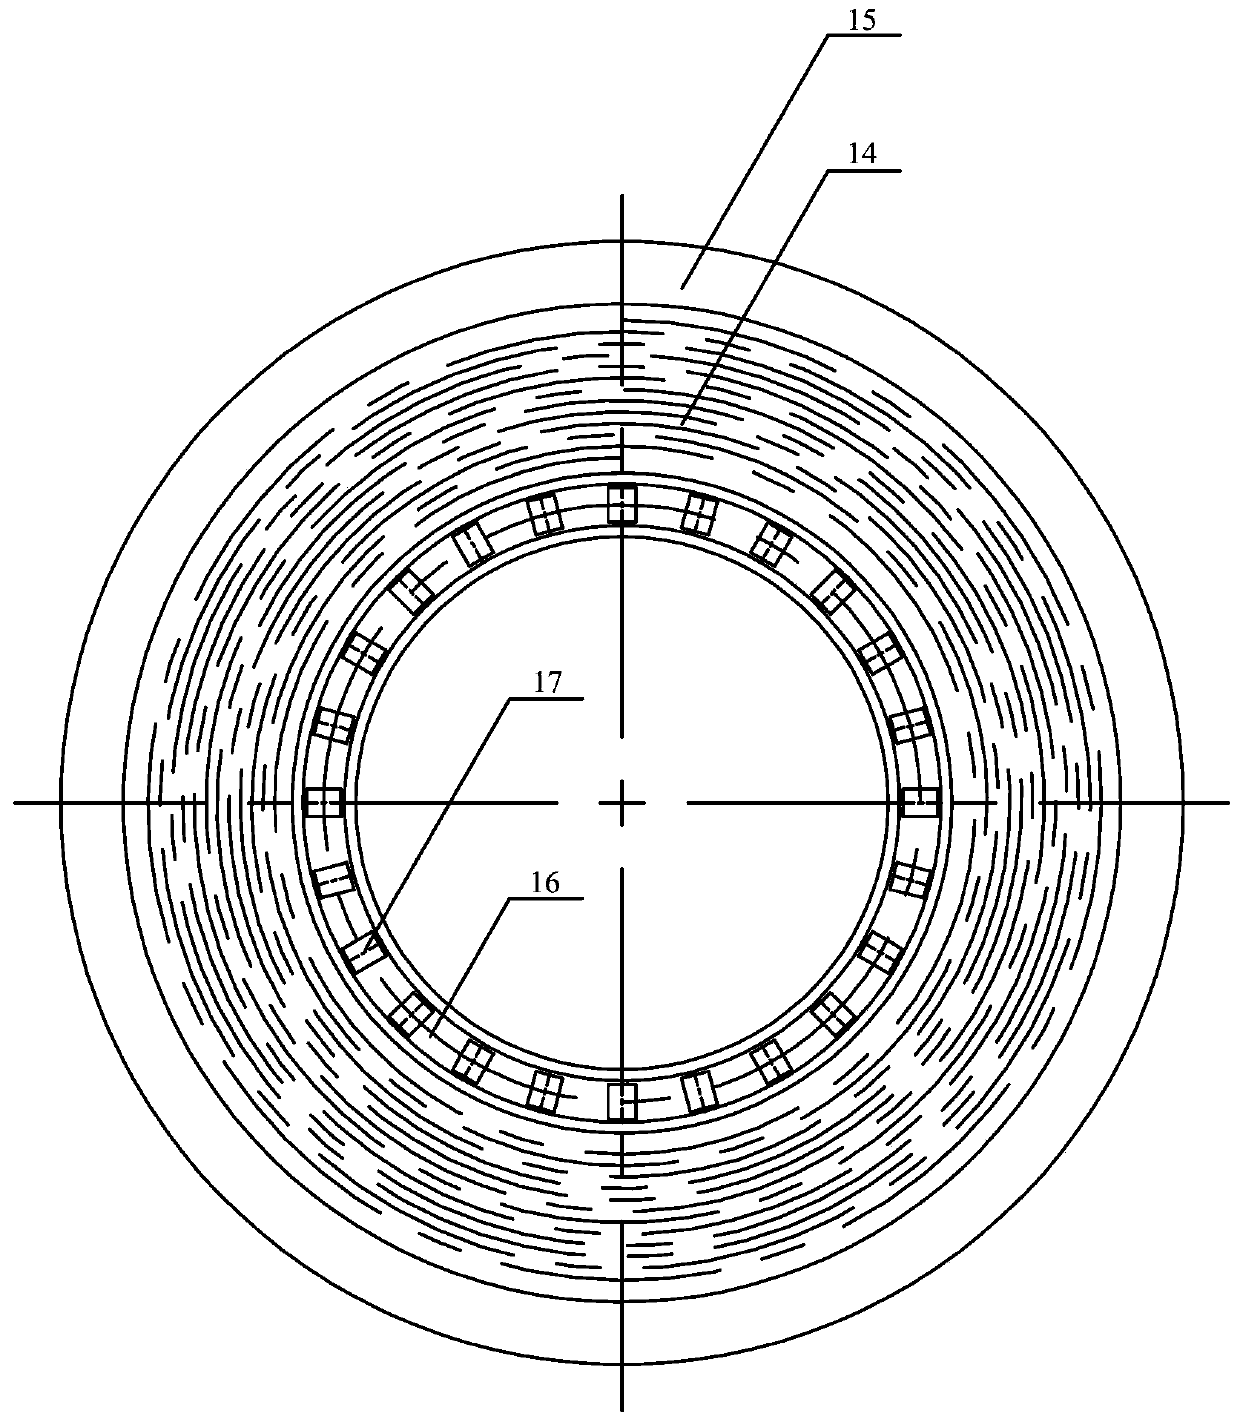 A shaft displacement fault self-healing control device for a centrifugal compressor